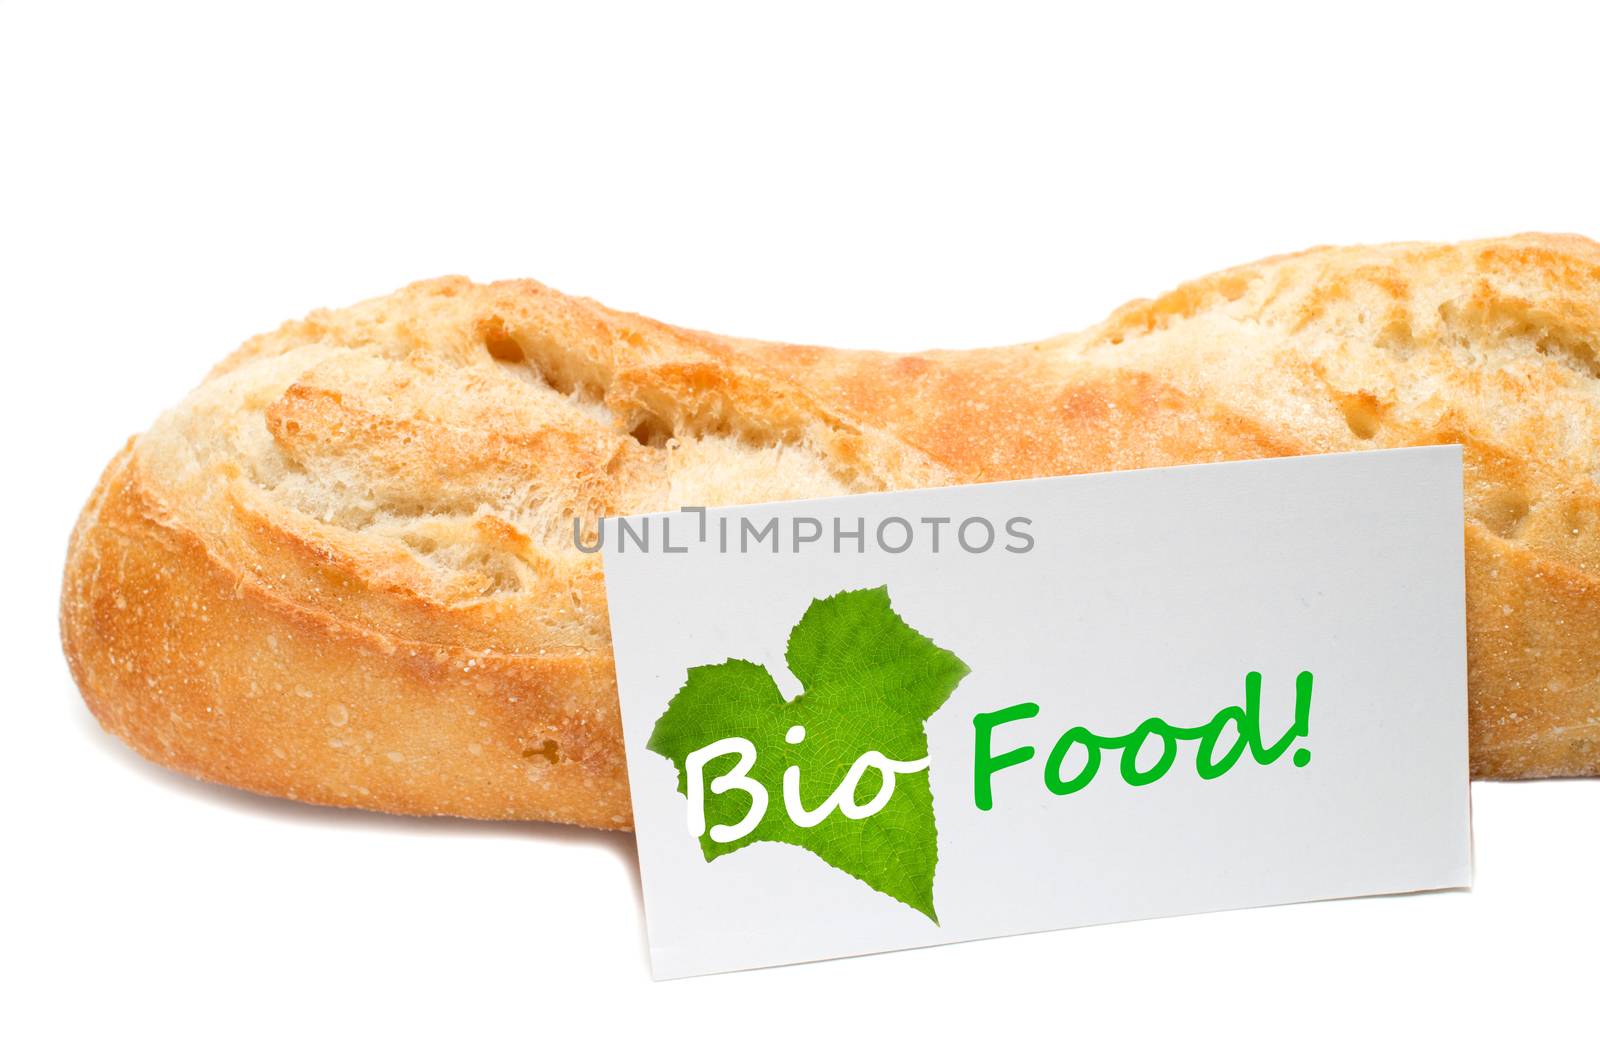 Bio Food concept from a bakery on white background